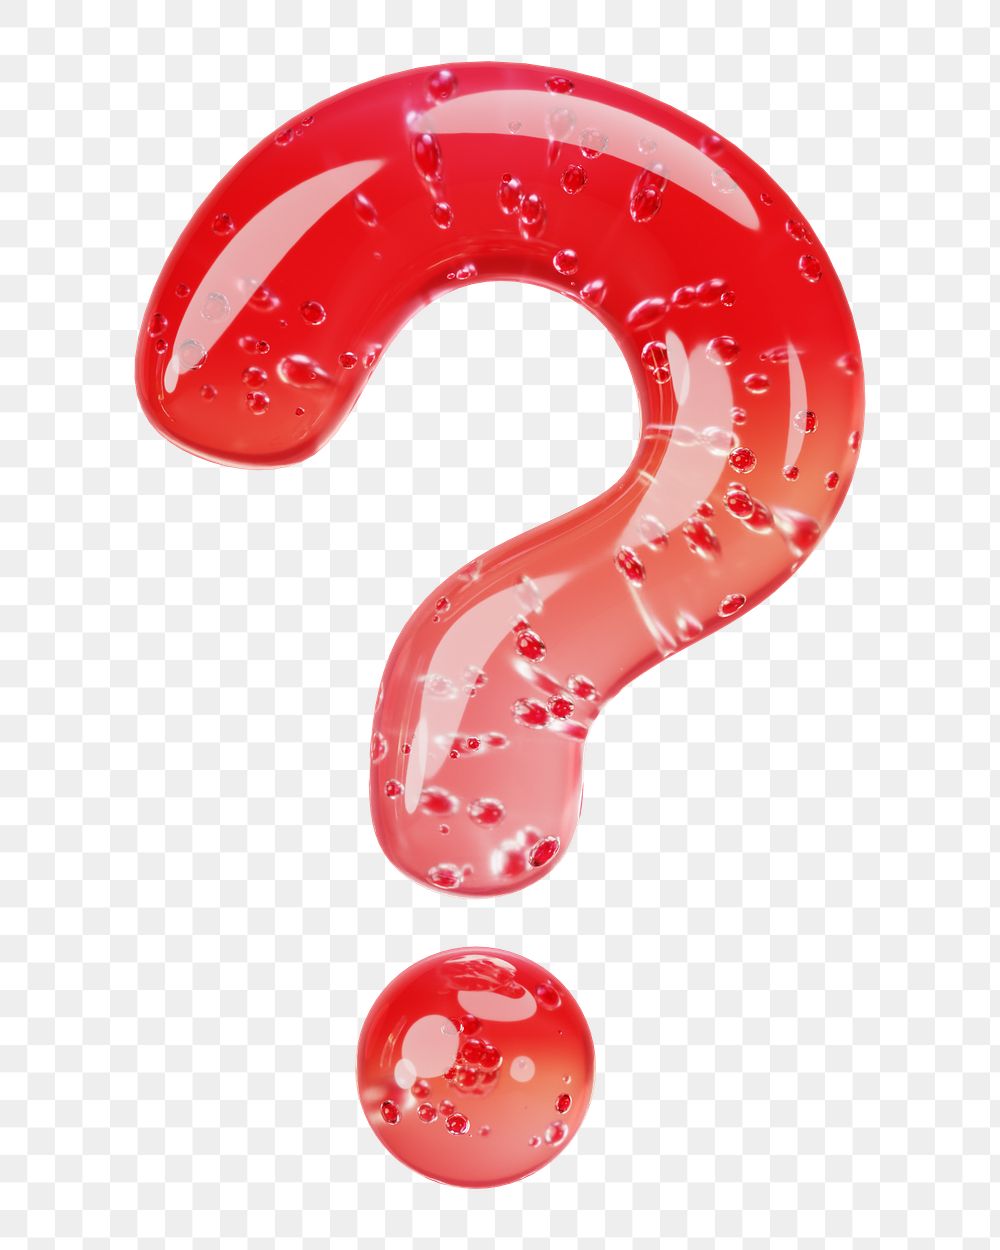 Question mark sign png 3D red jelly symbol, transparent background